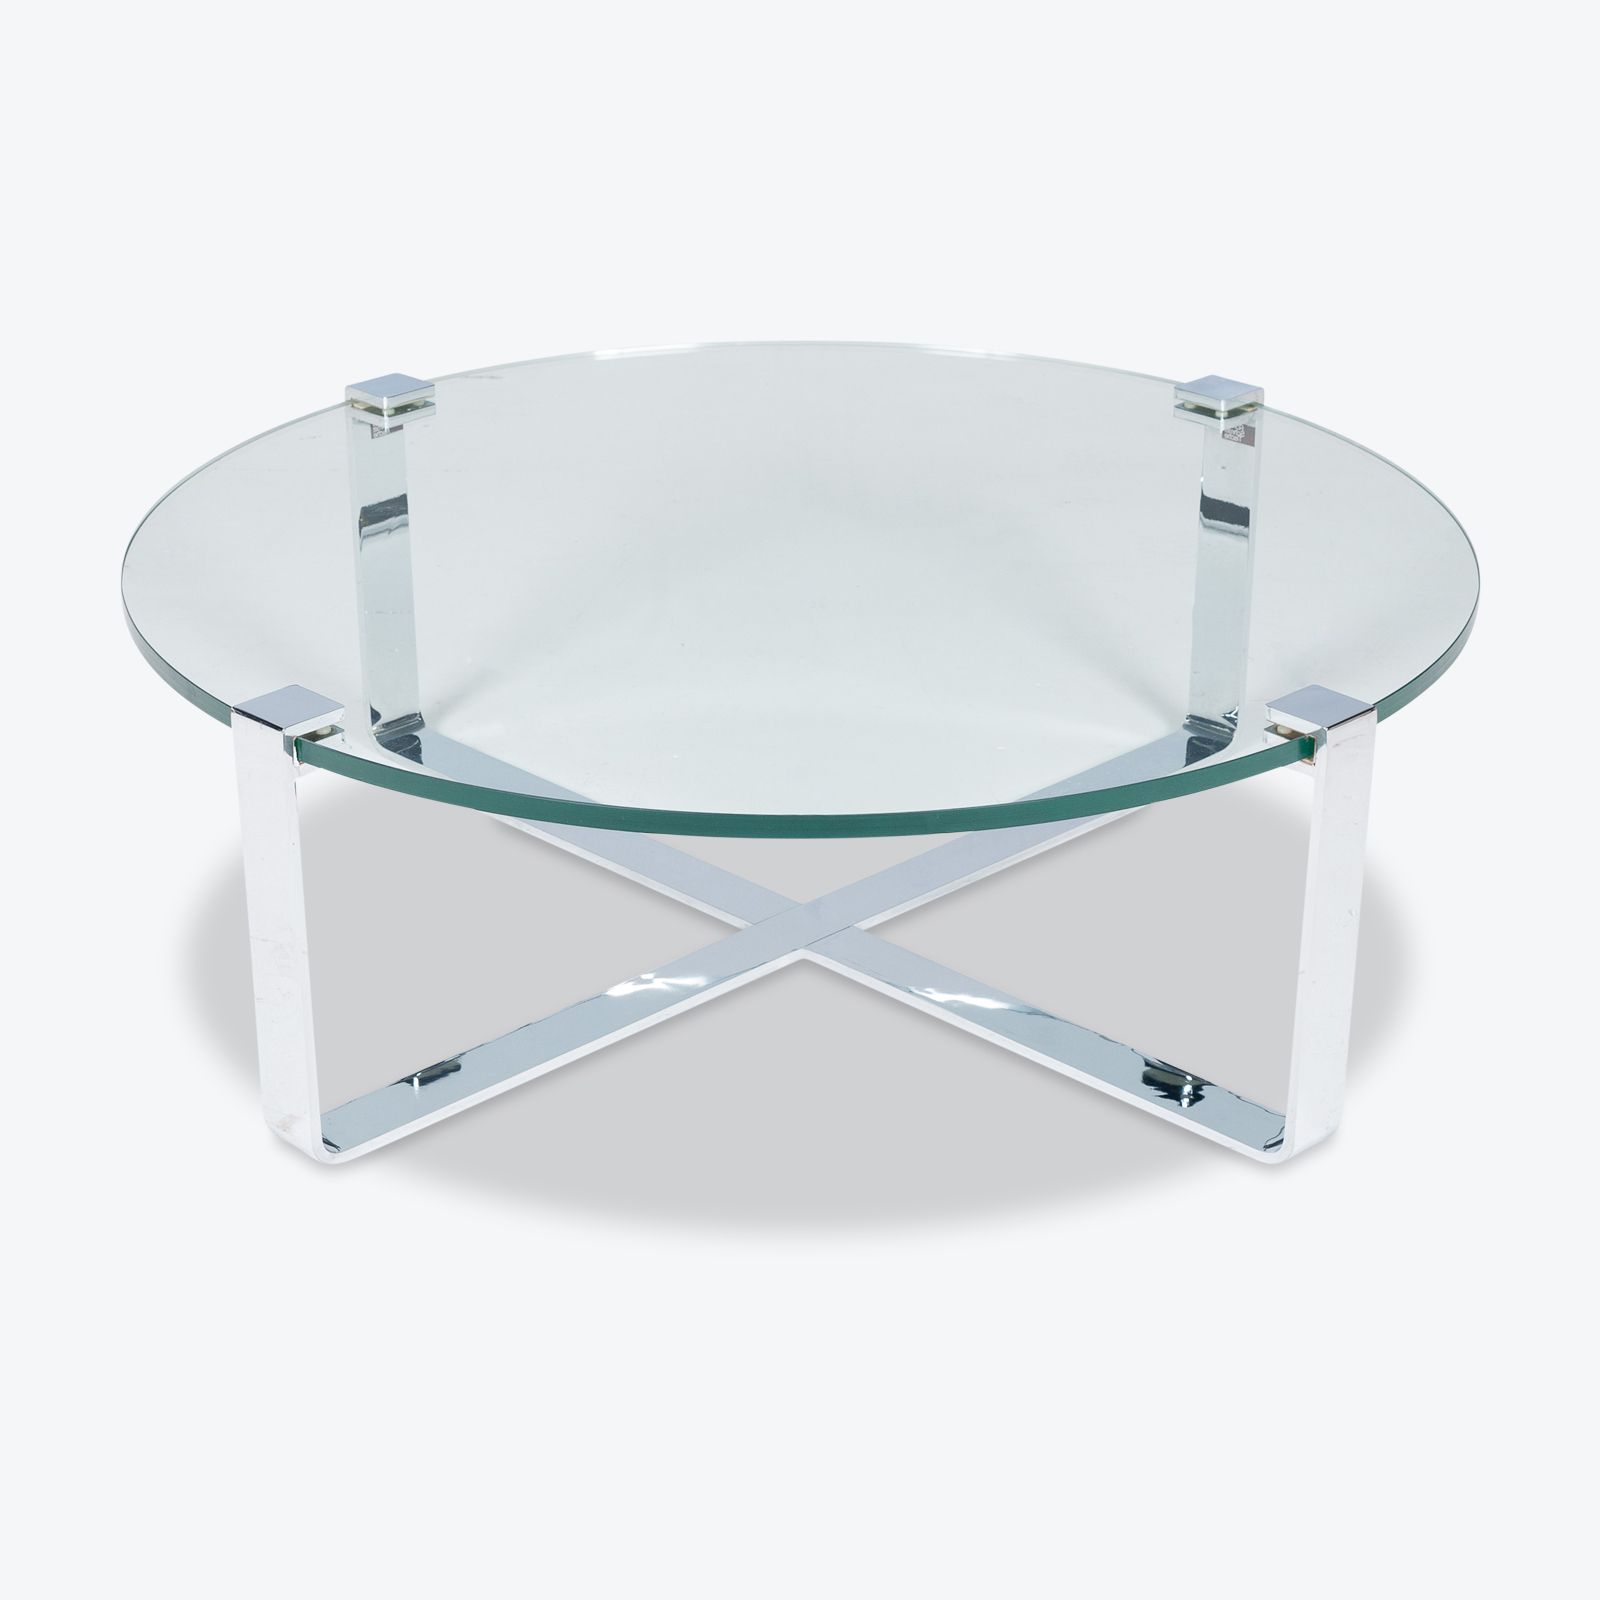 Most Recent Round Coffee Table In Glass And Polished Chrome Regarding Polished Chrome Round Cocktail Tables (View 14 of 20)